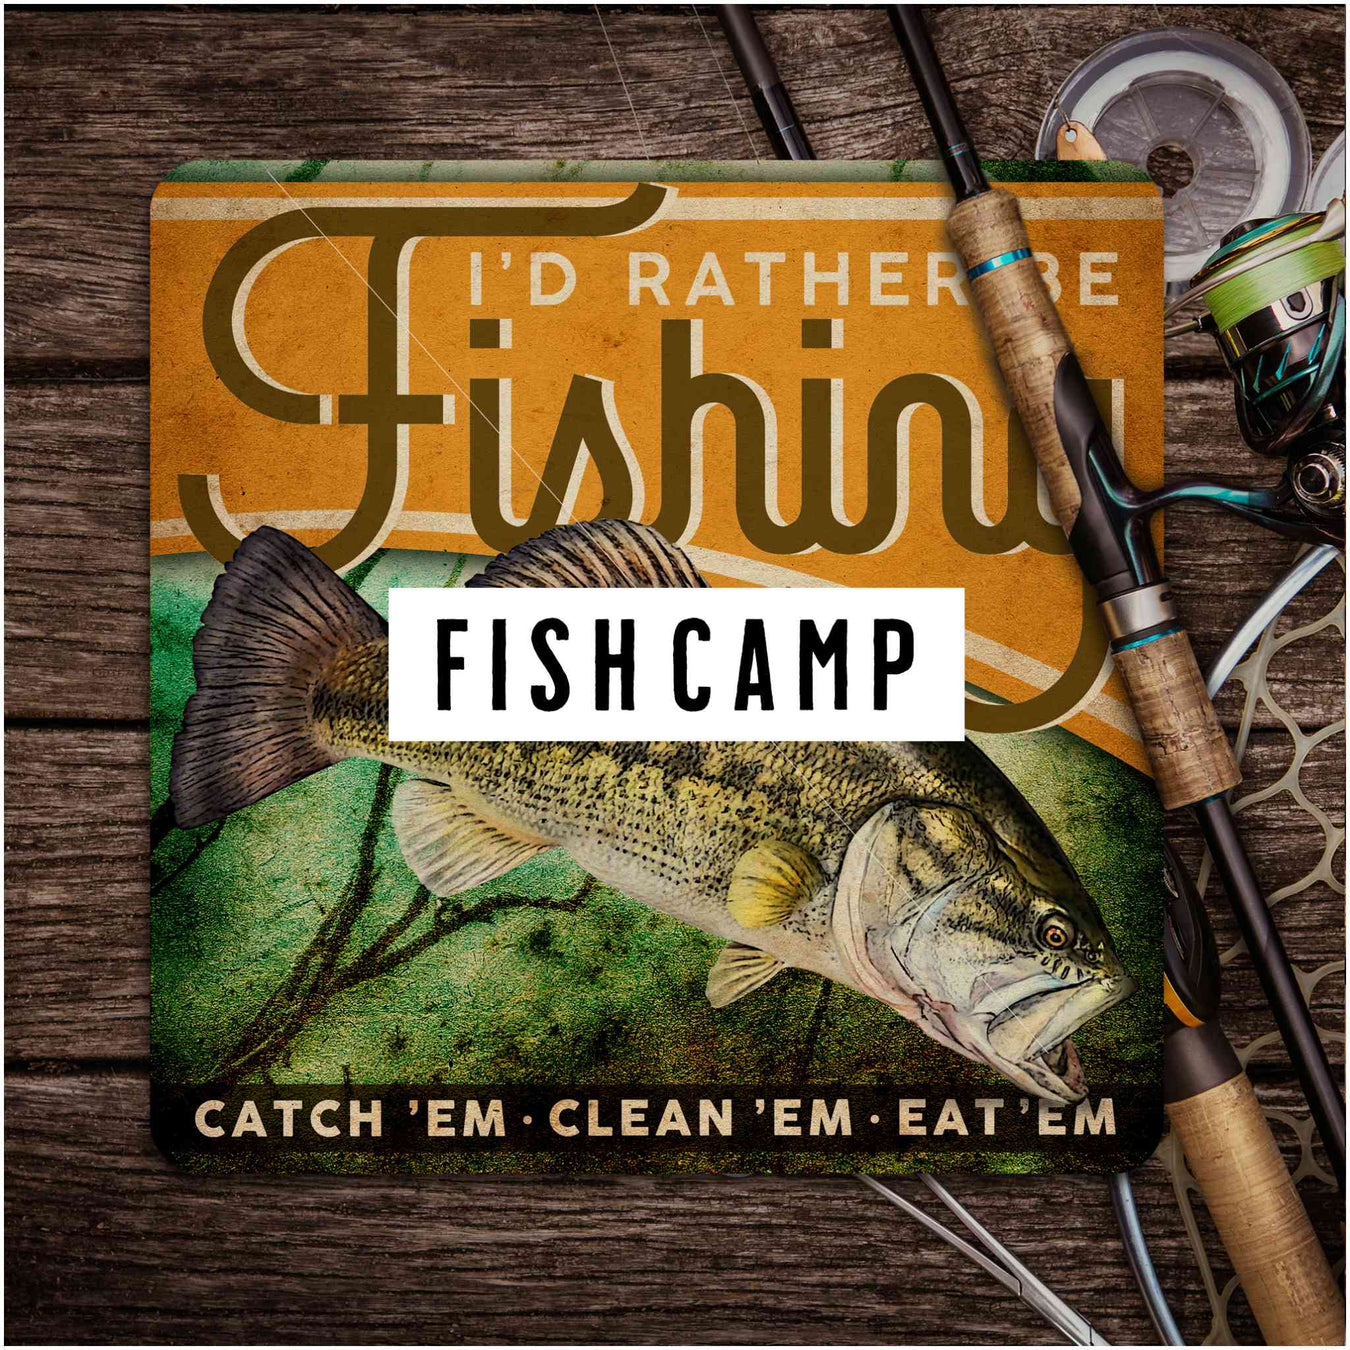 One of Sunshine Corner's Fish Camp Signs, "I'd Rather Be Fishing" with a banner labeled "Fish Camp" on the top with a dark overlay.